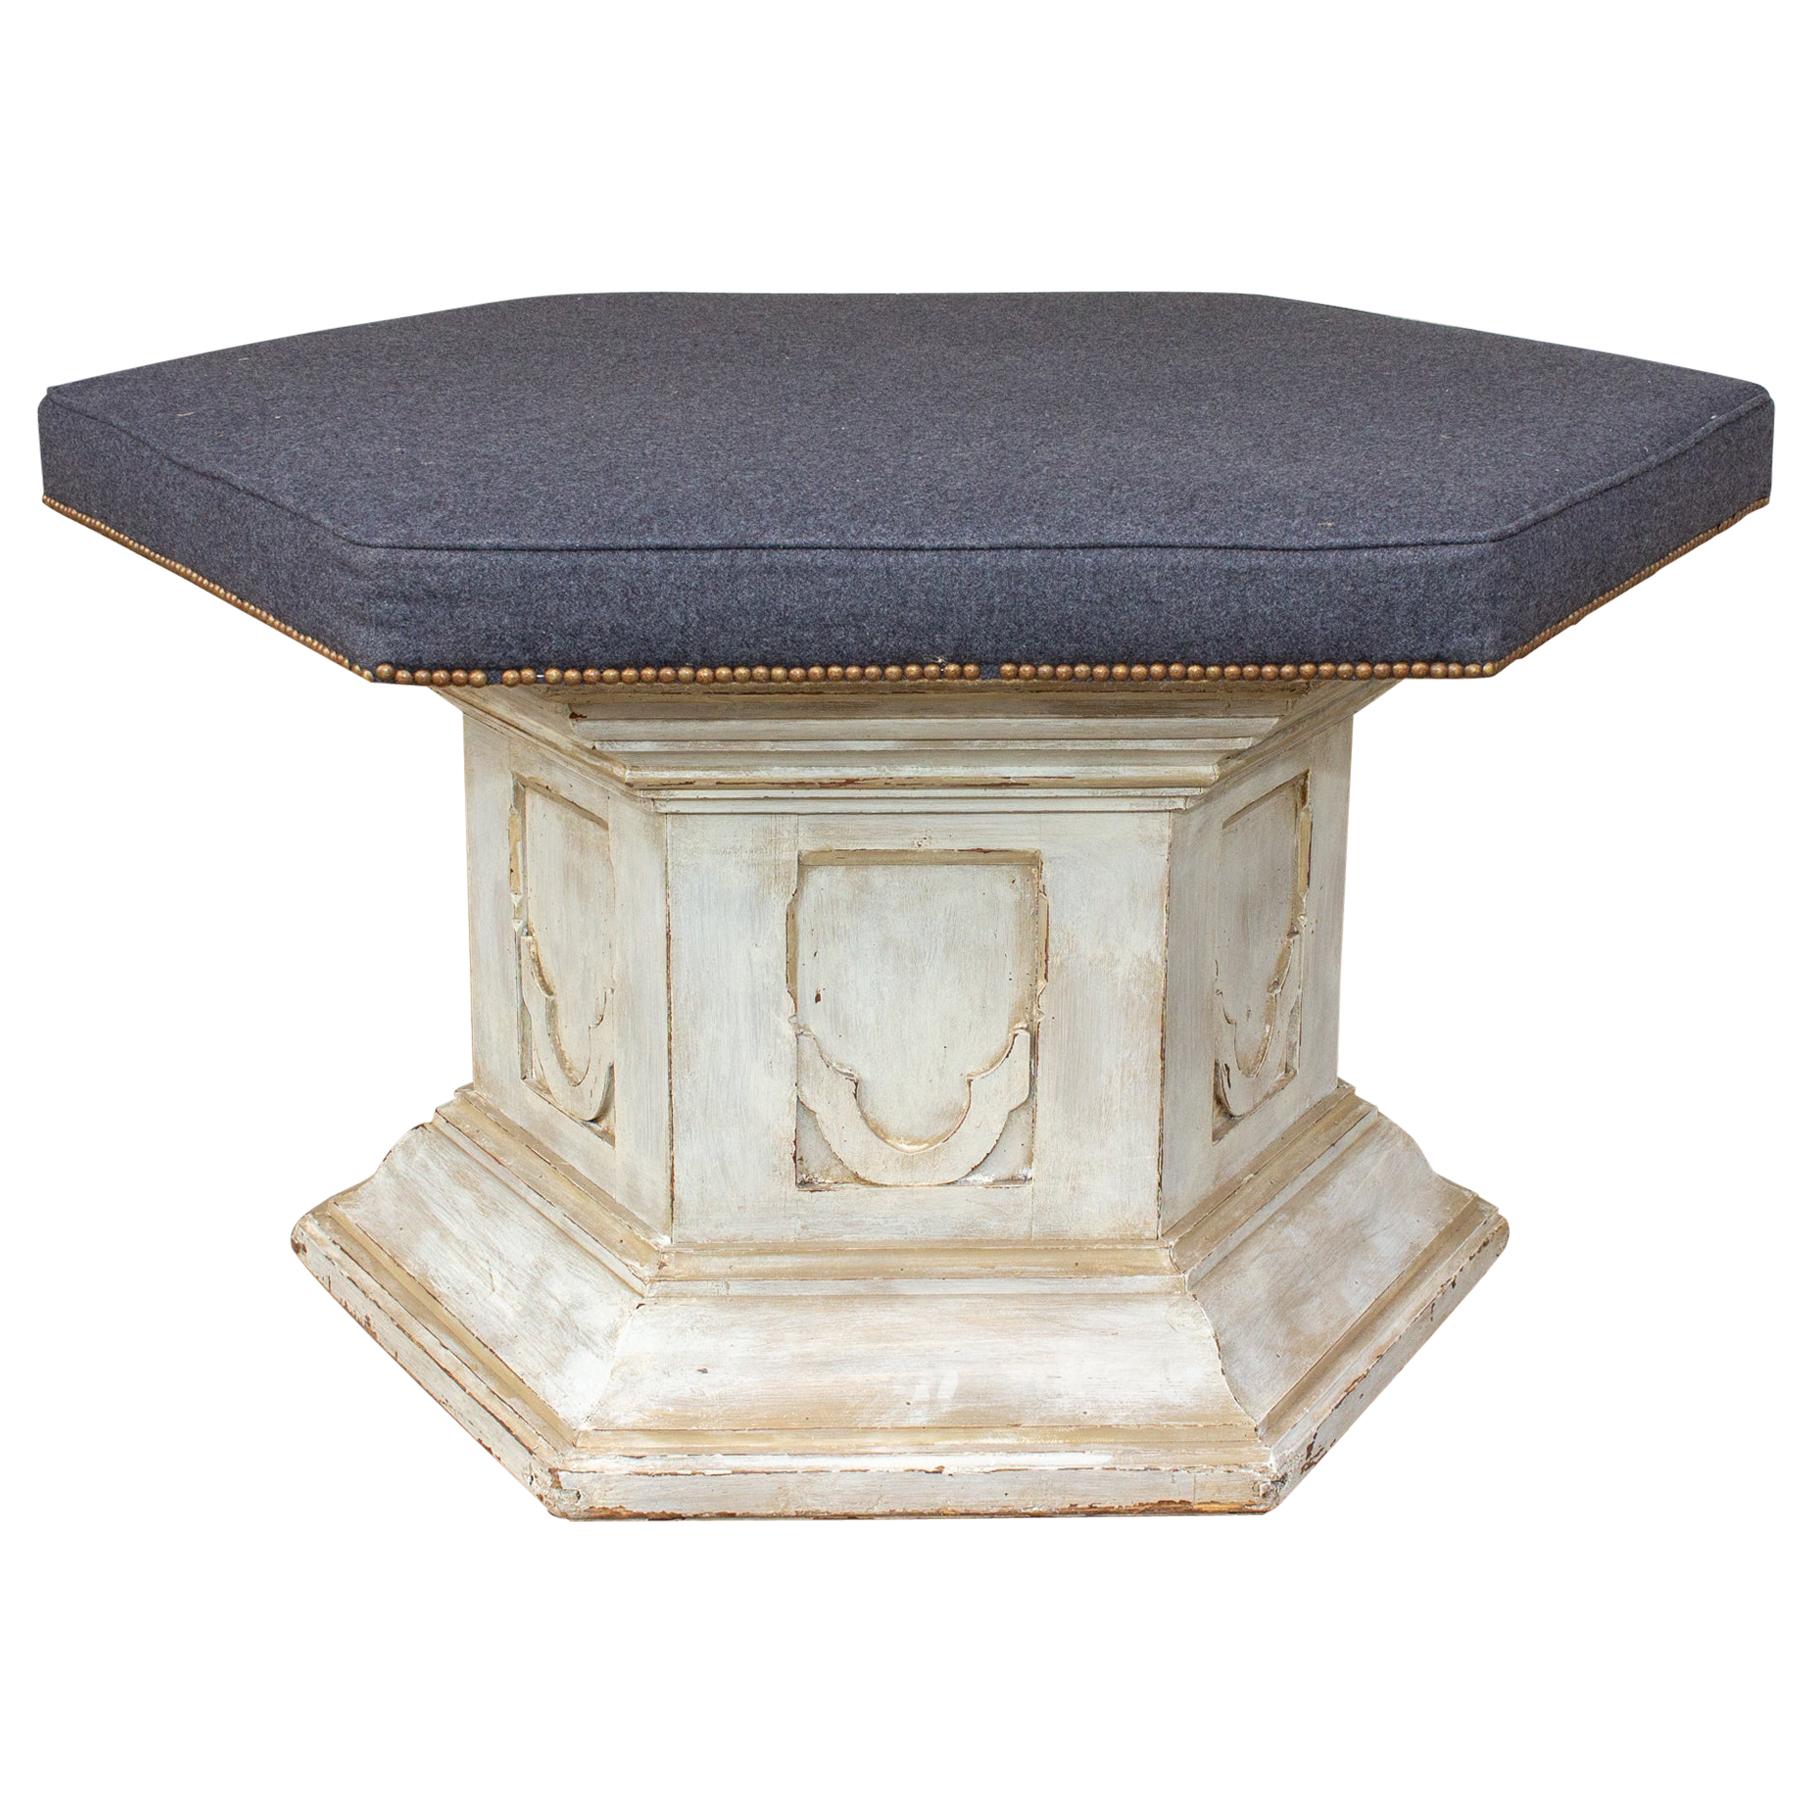 Antique French Ecclesial Hexagonal-Shaped Ottoman with Gray Wool Upholstery For Sale